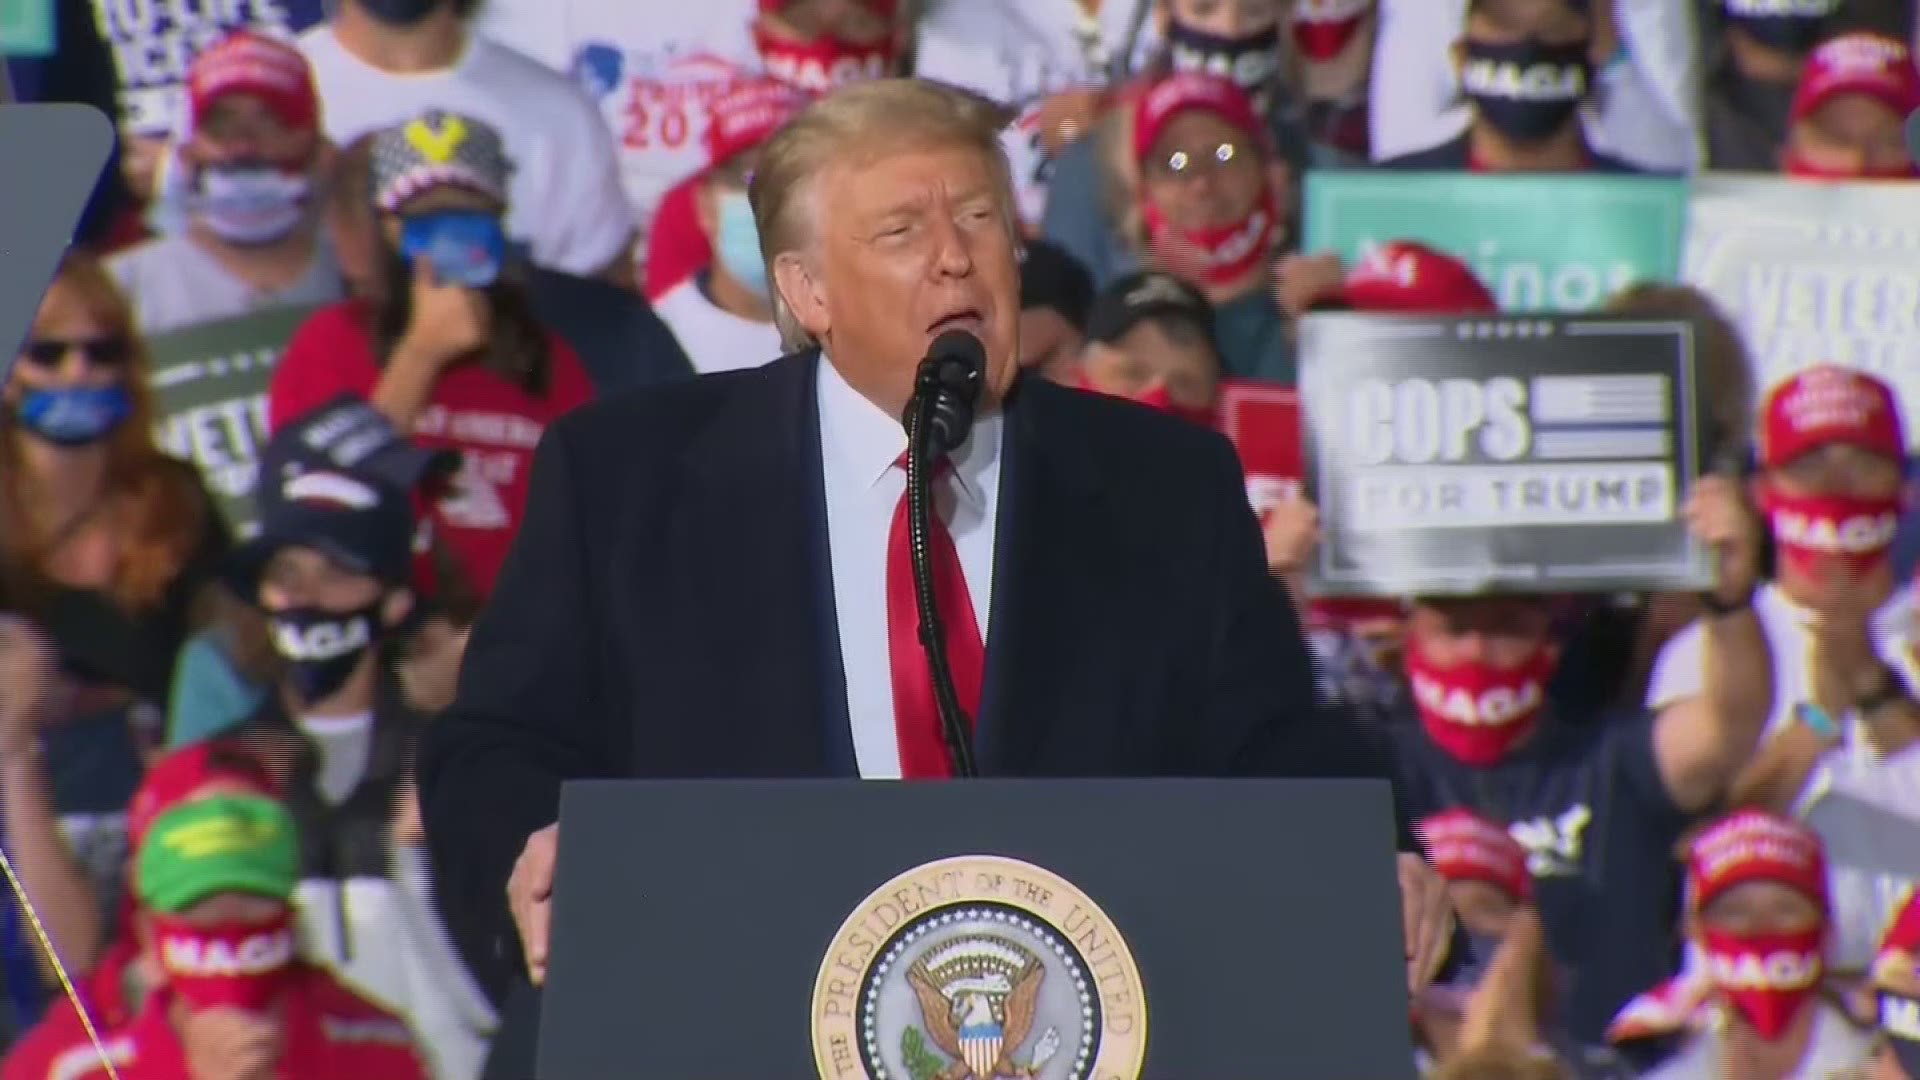 The two teens were called onto the stage during Monday's rally in Toledo. President Trump championed their support of the men and women of law enforcement.